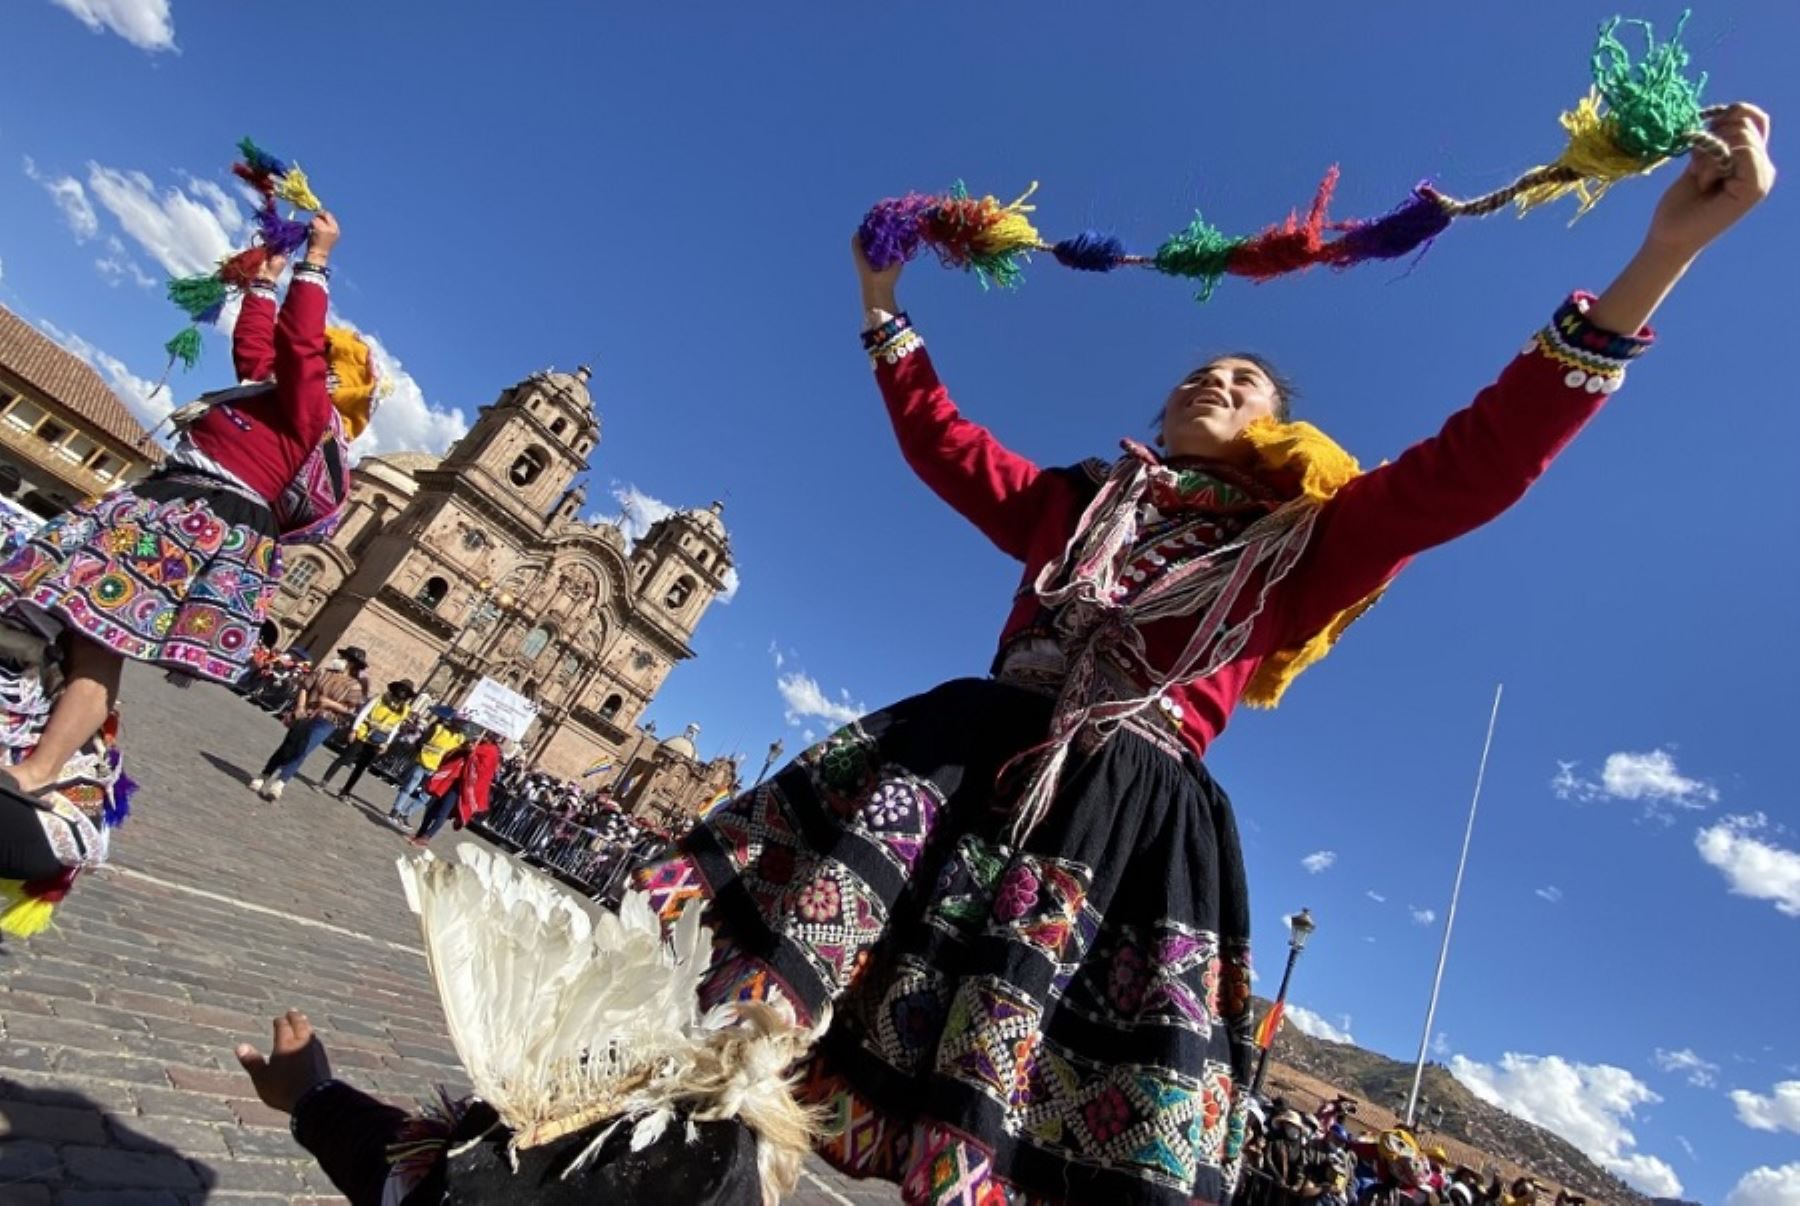 Condé Nast Traveler: Cusco is one of the top 10 cities in the world to visit |  News